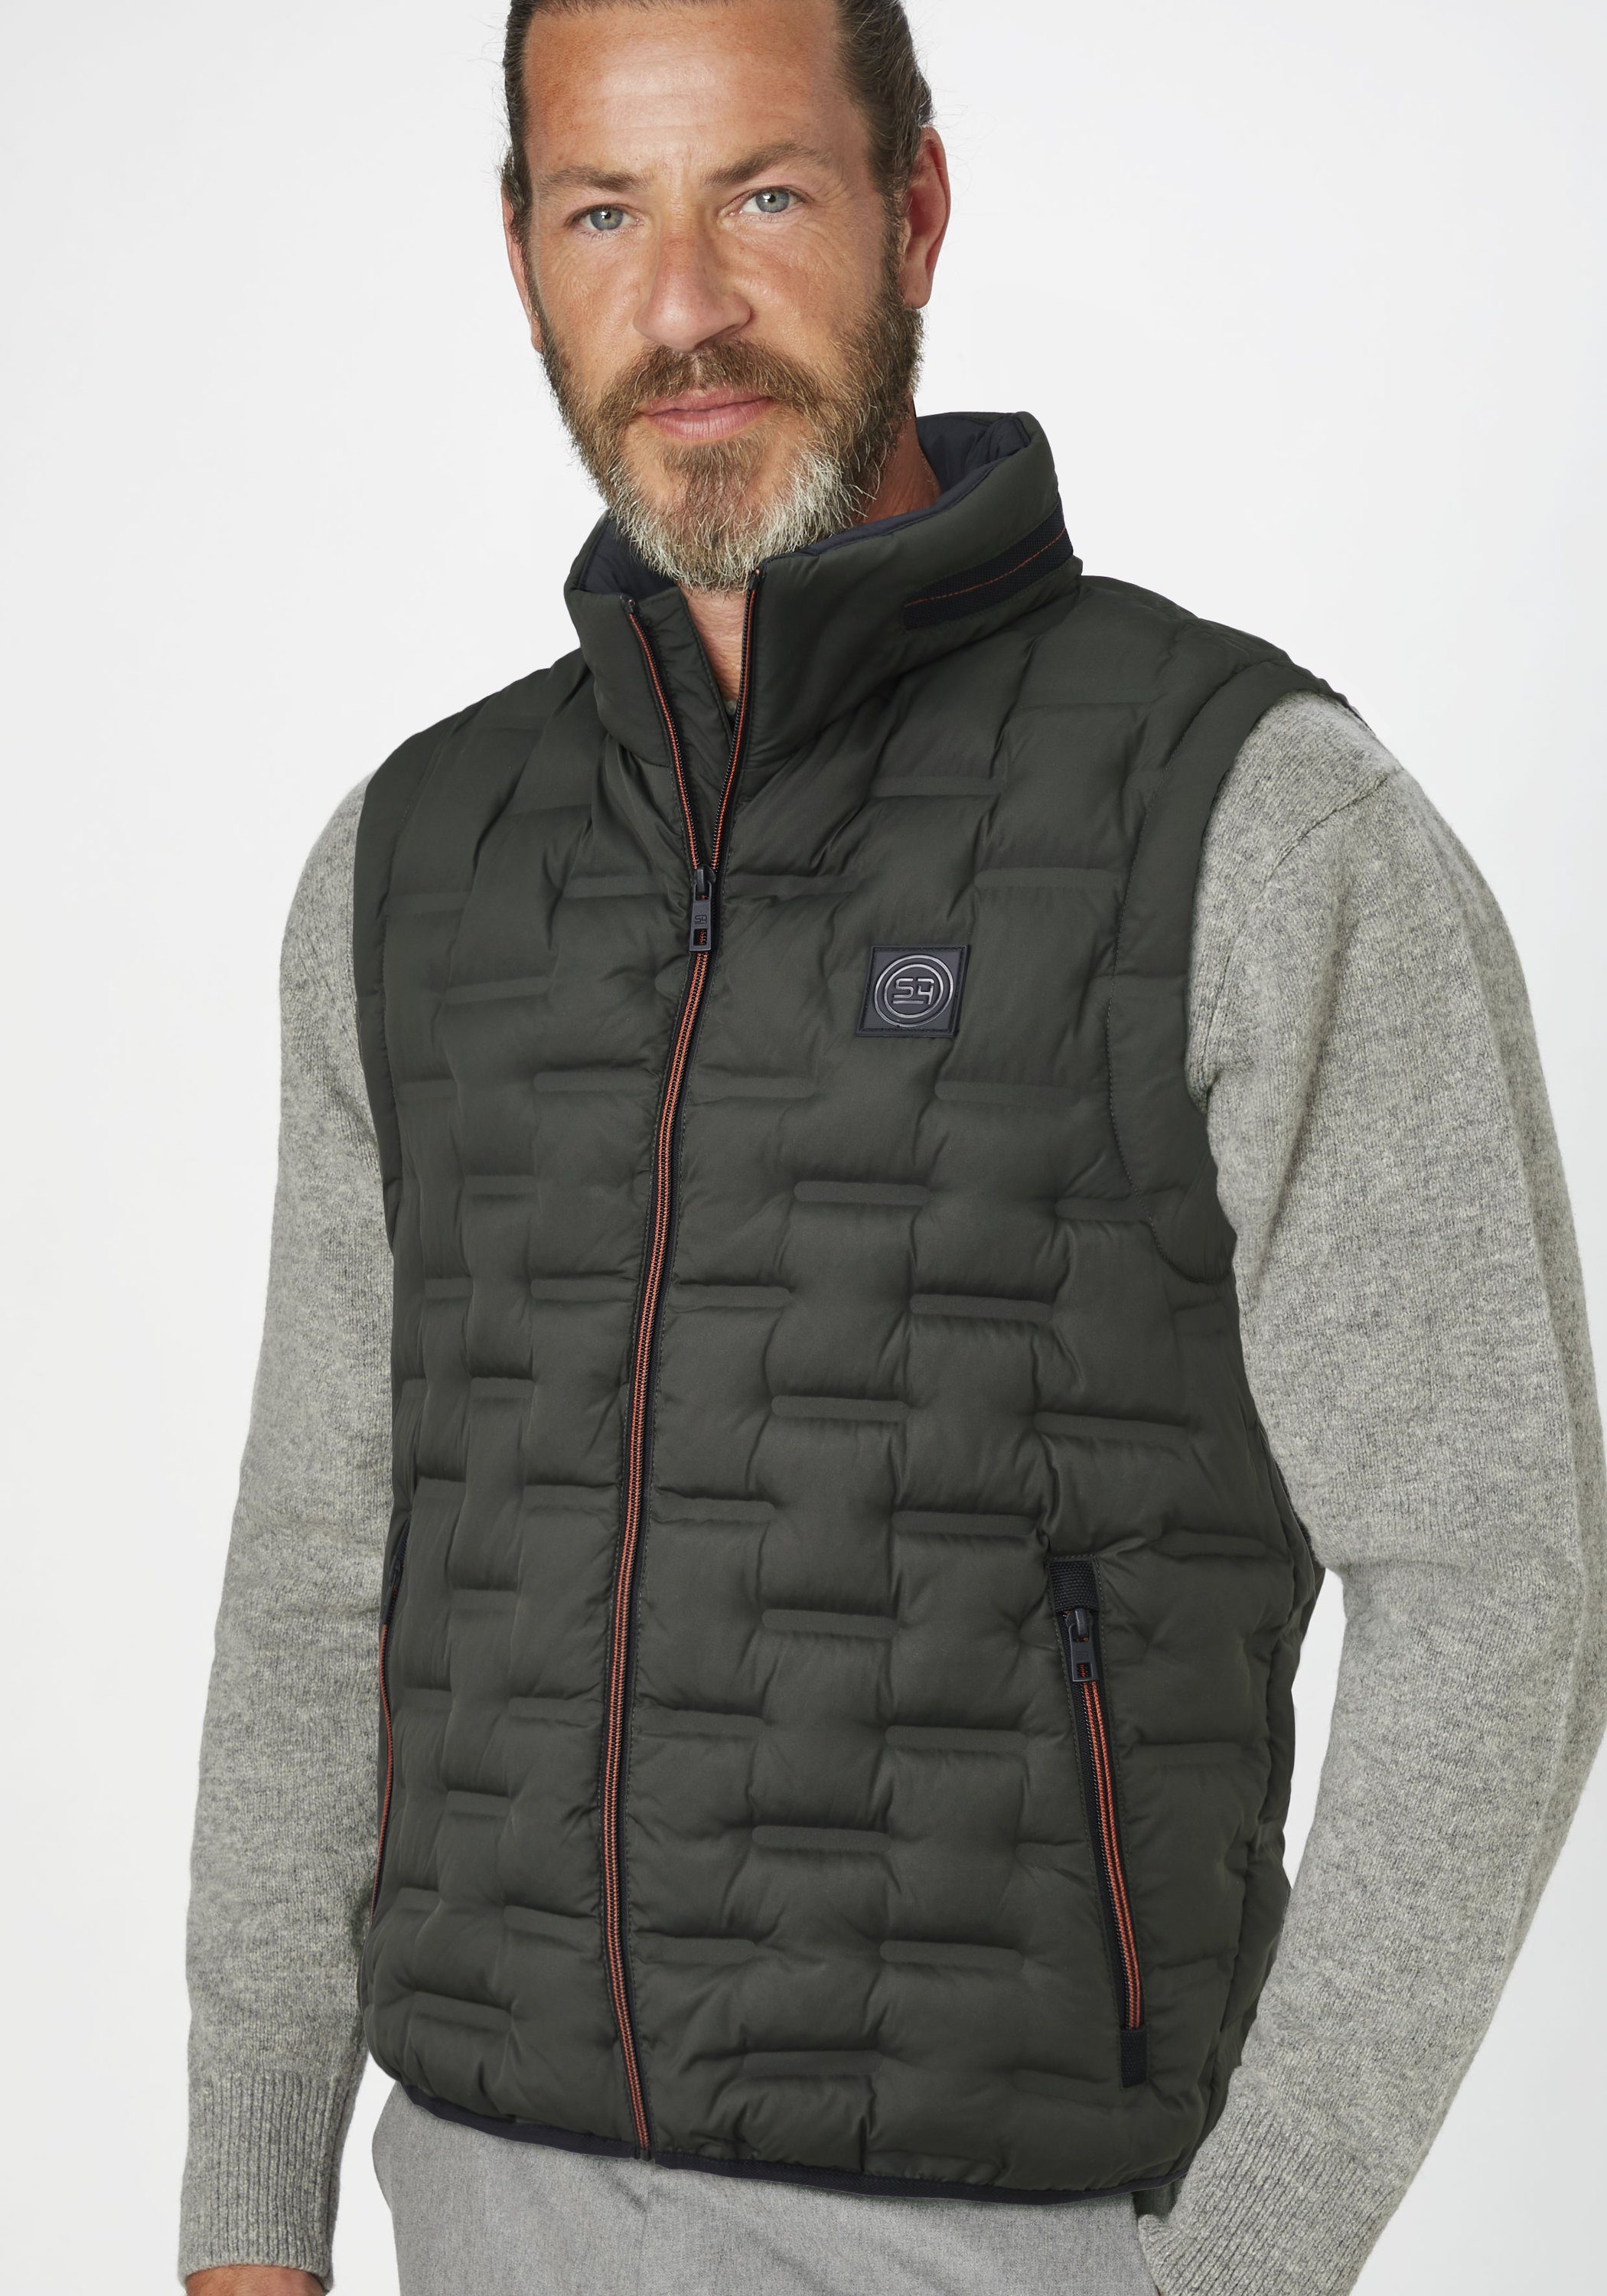 S4 Jackets Sportive ARES Outdoorweste Steppweste